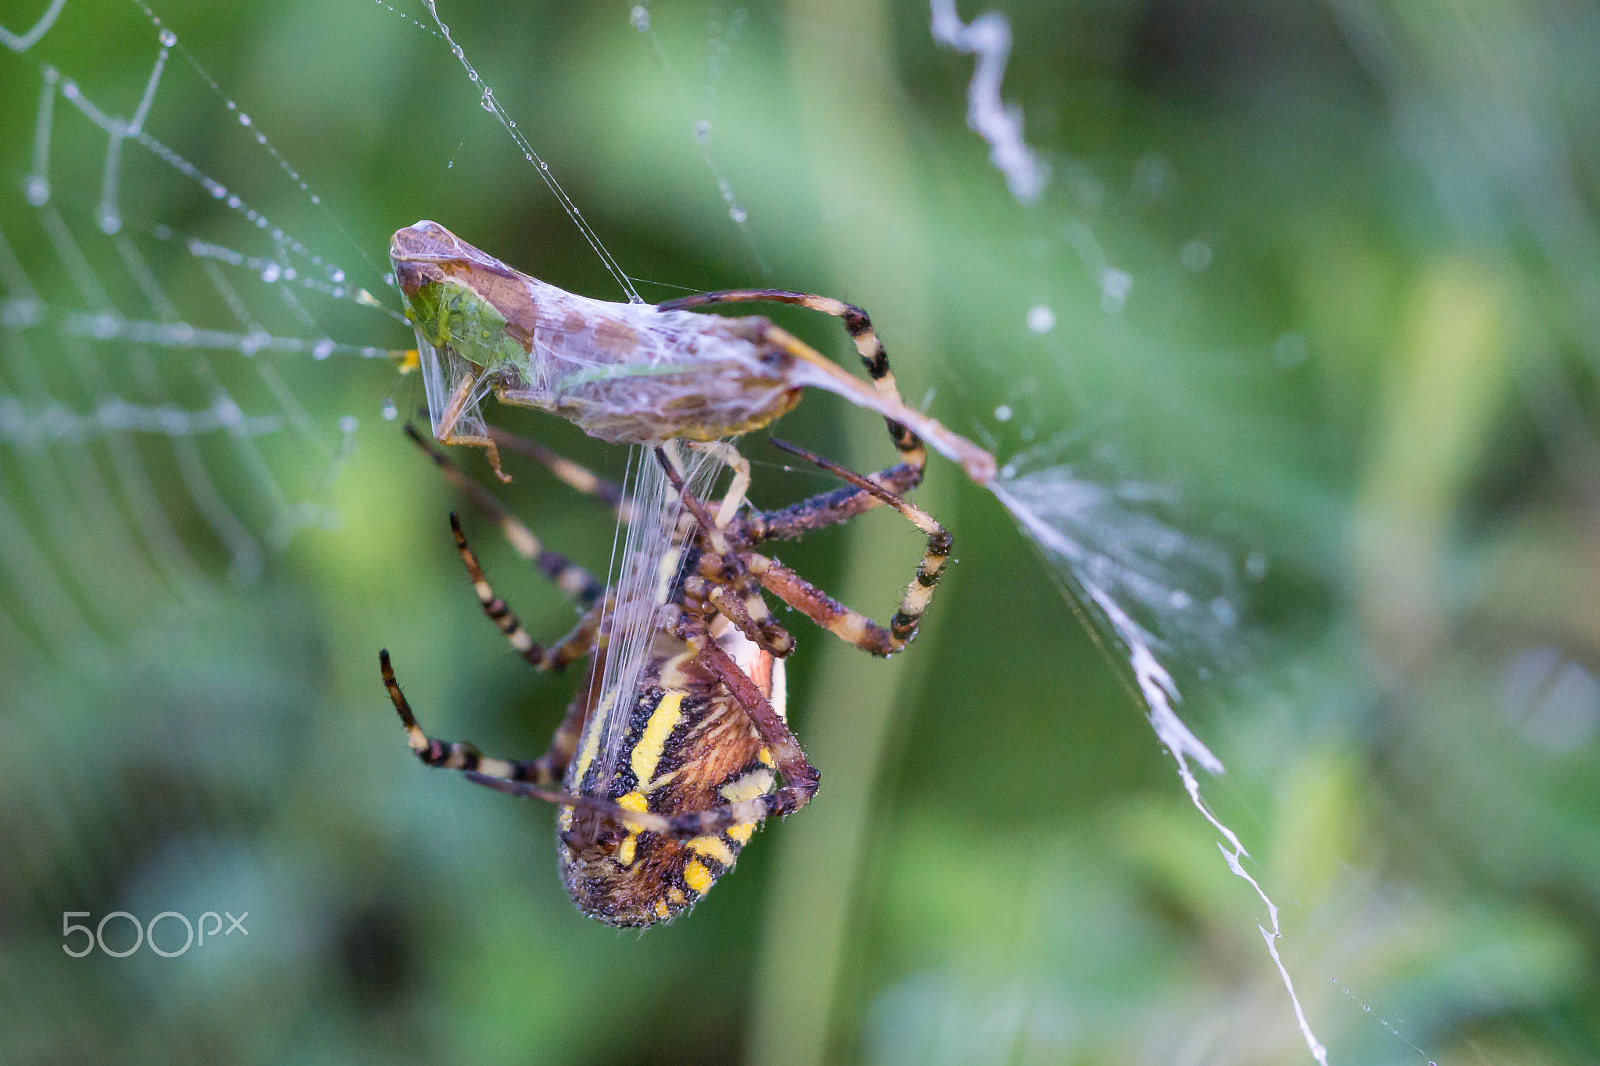 Sony a6000 sample photo. Wasp spider with prey photography